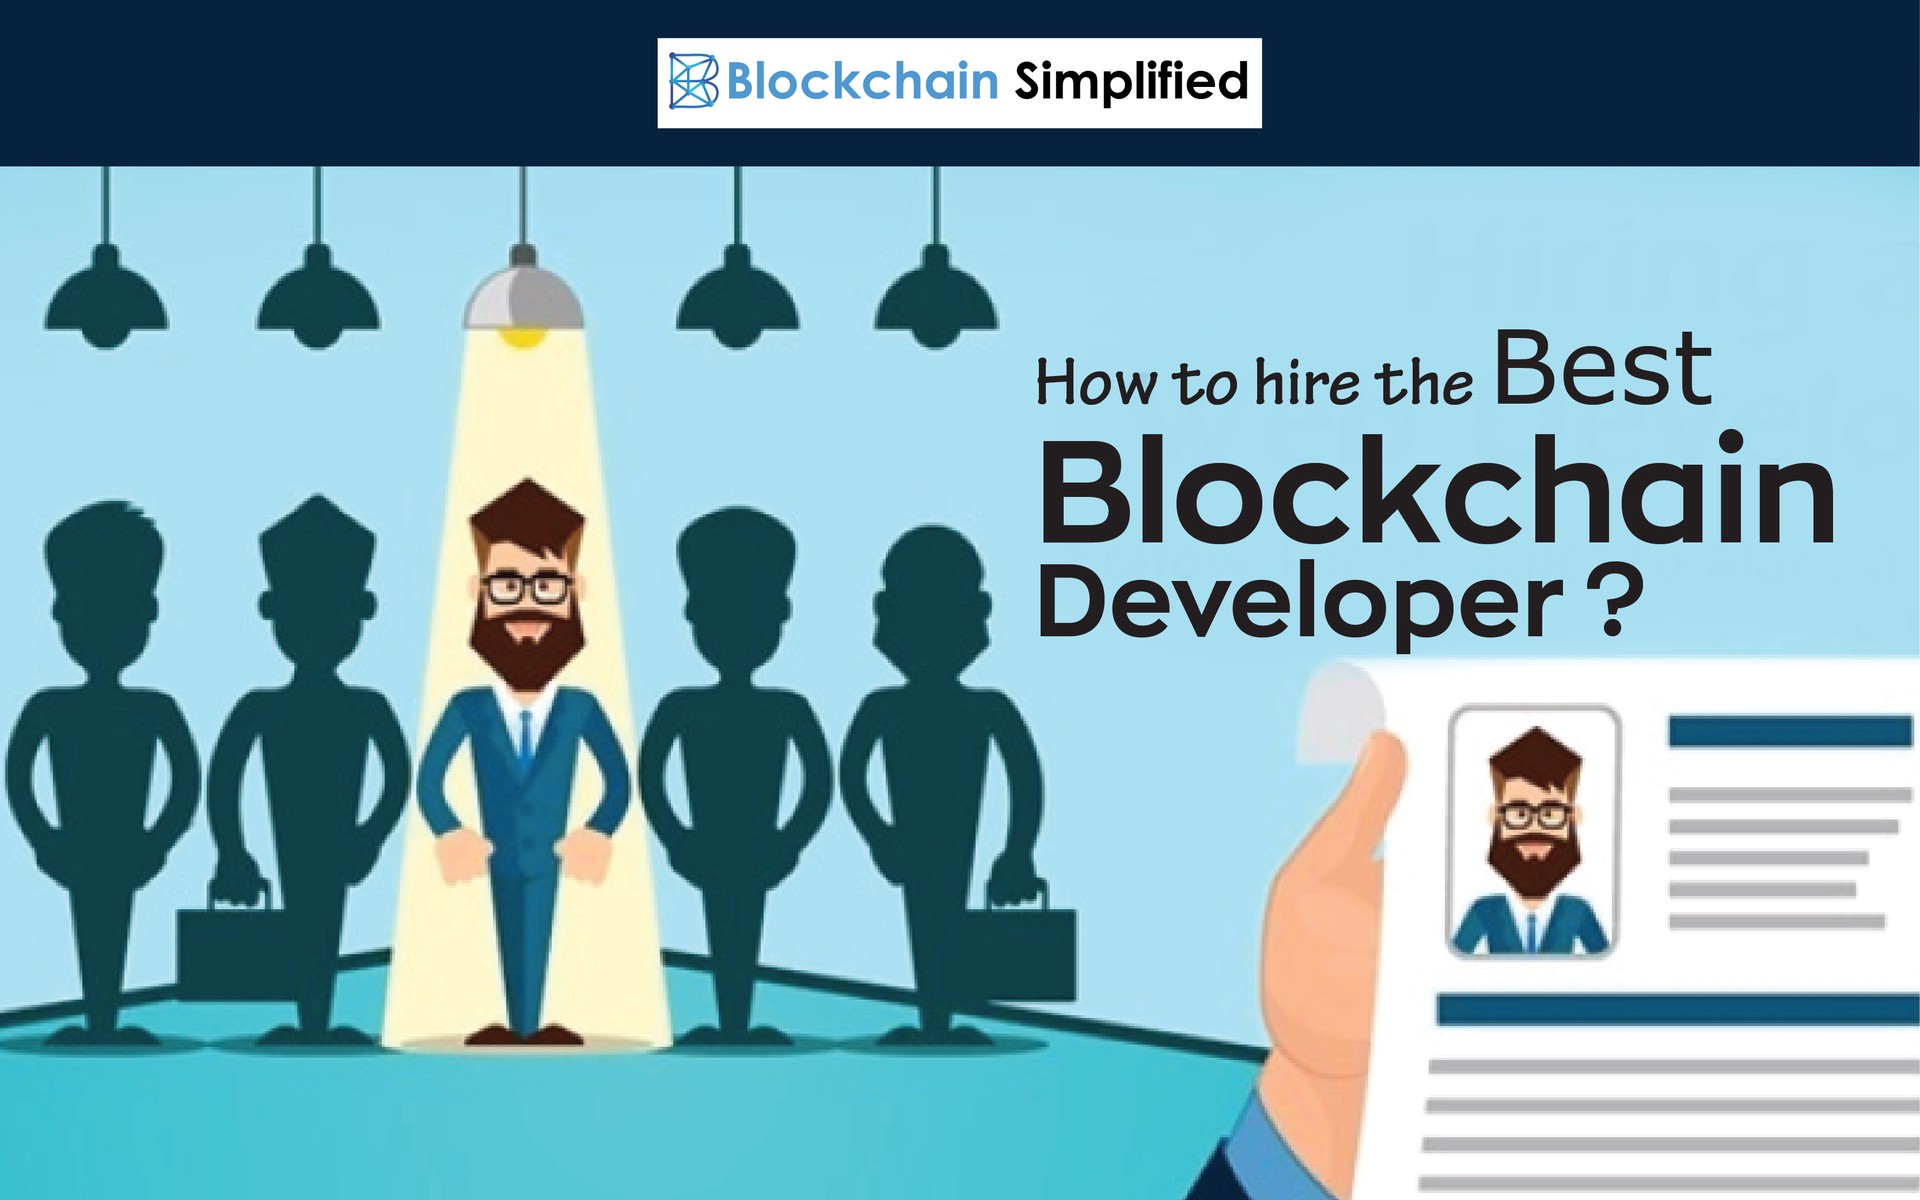 How to hire the best Blockchain developer